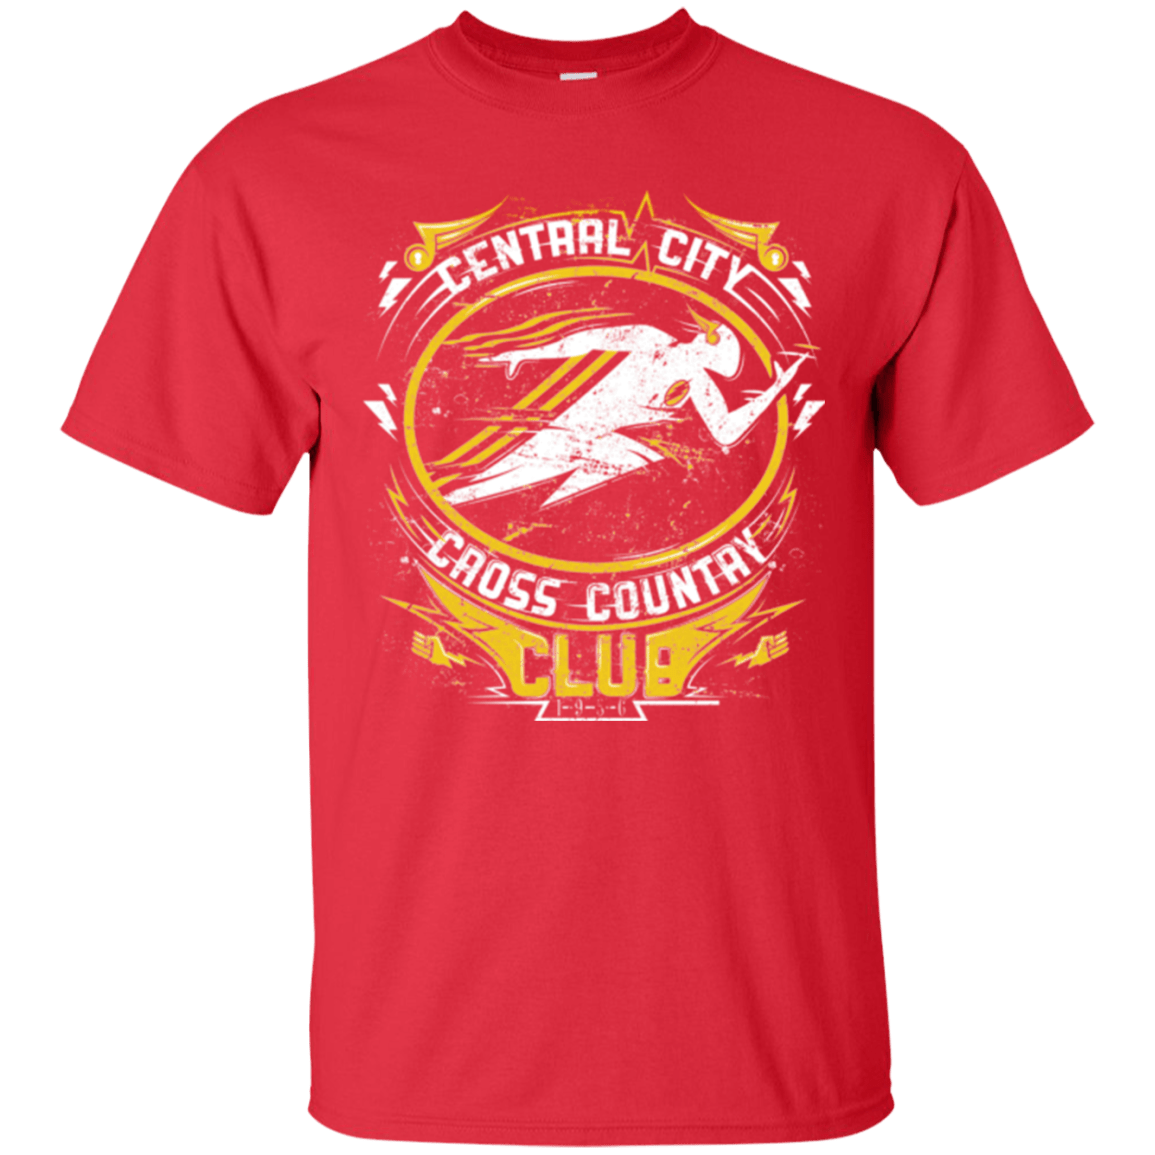 T-Shirts Red / Small Cross Country Club T-Shirt